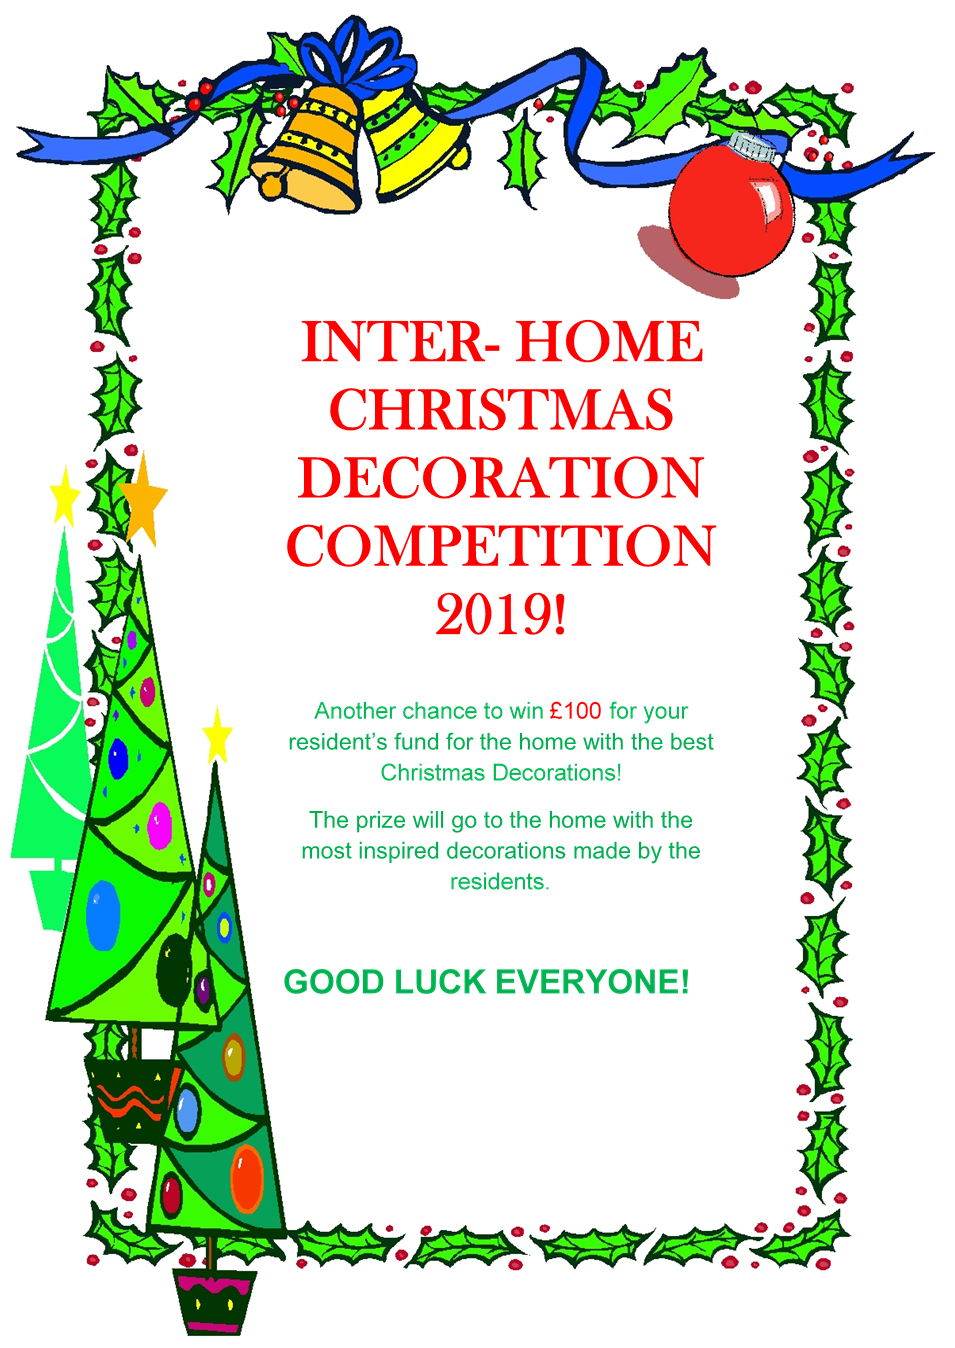 Inter-Home Christmas Decoration Competition 2019 Image